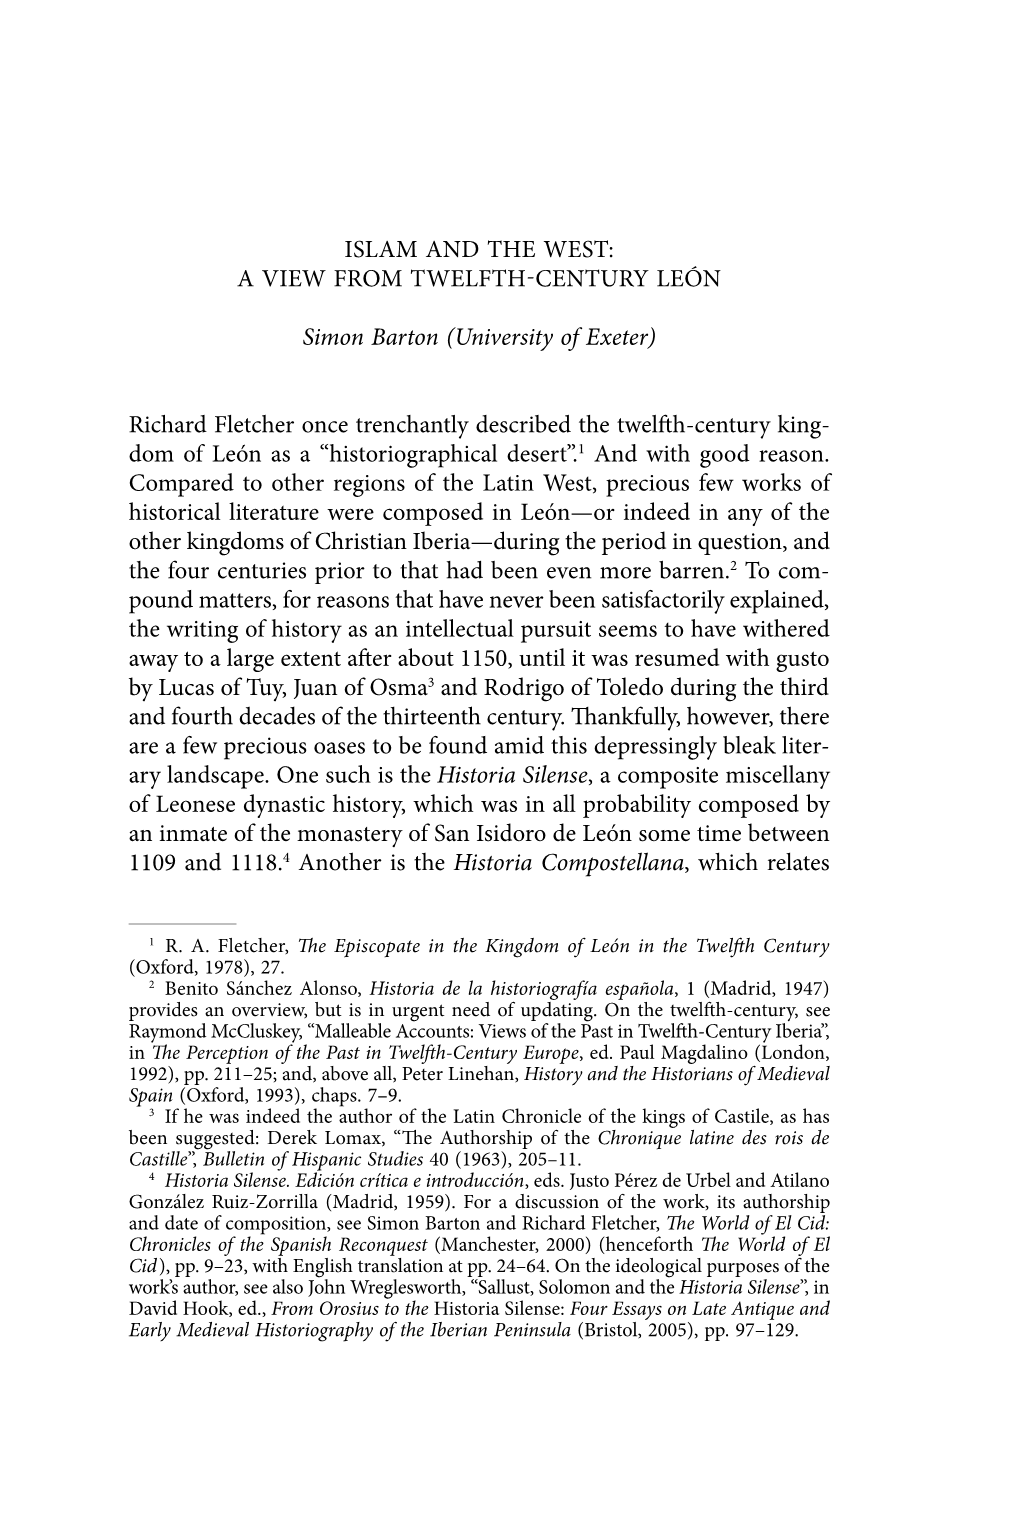 Islam and the West: a View from Twelfth-Century León